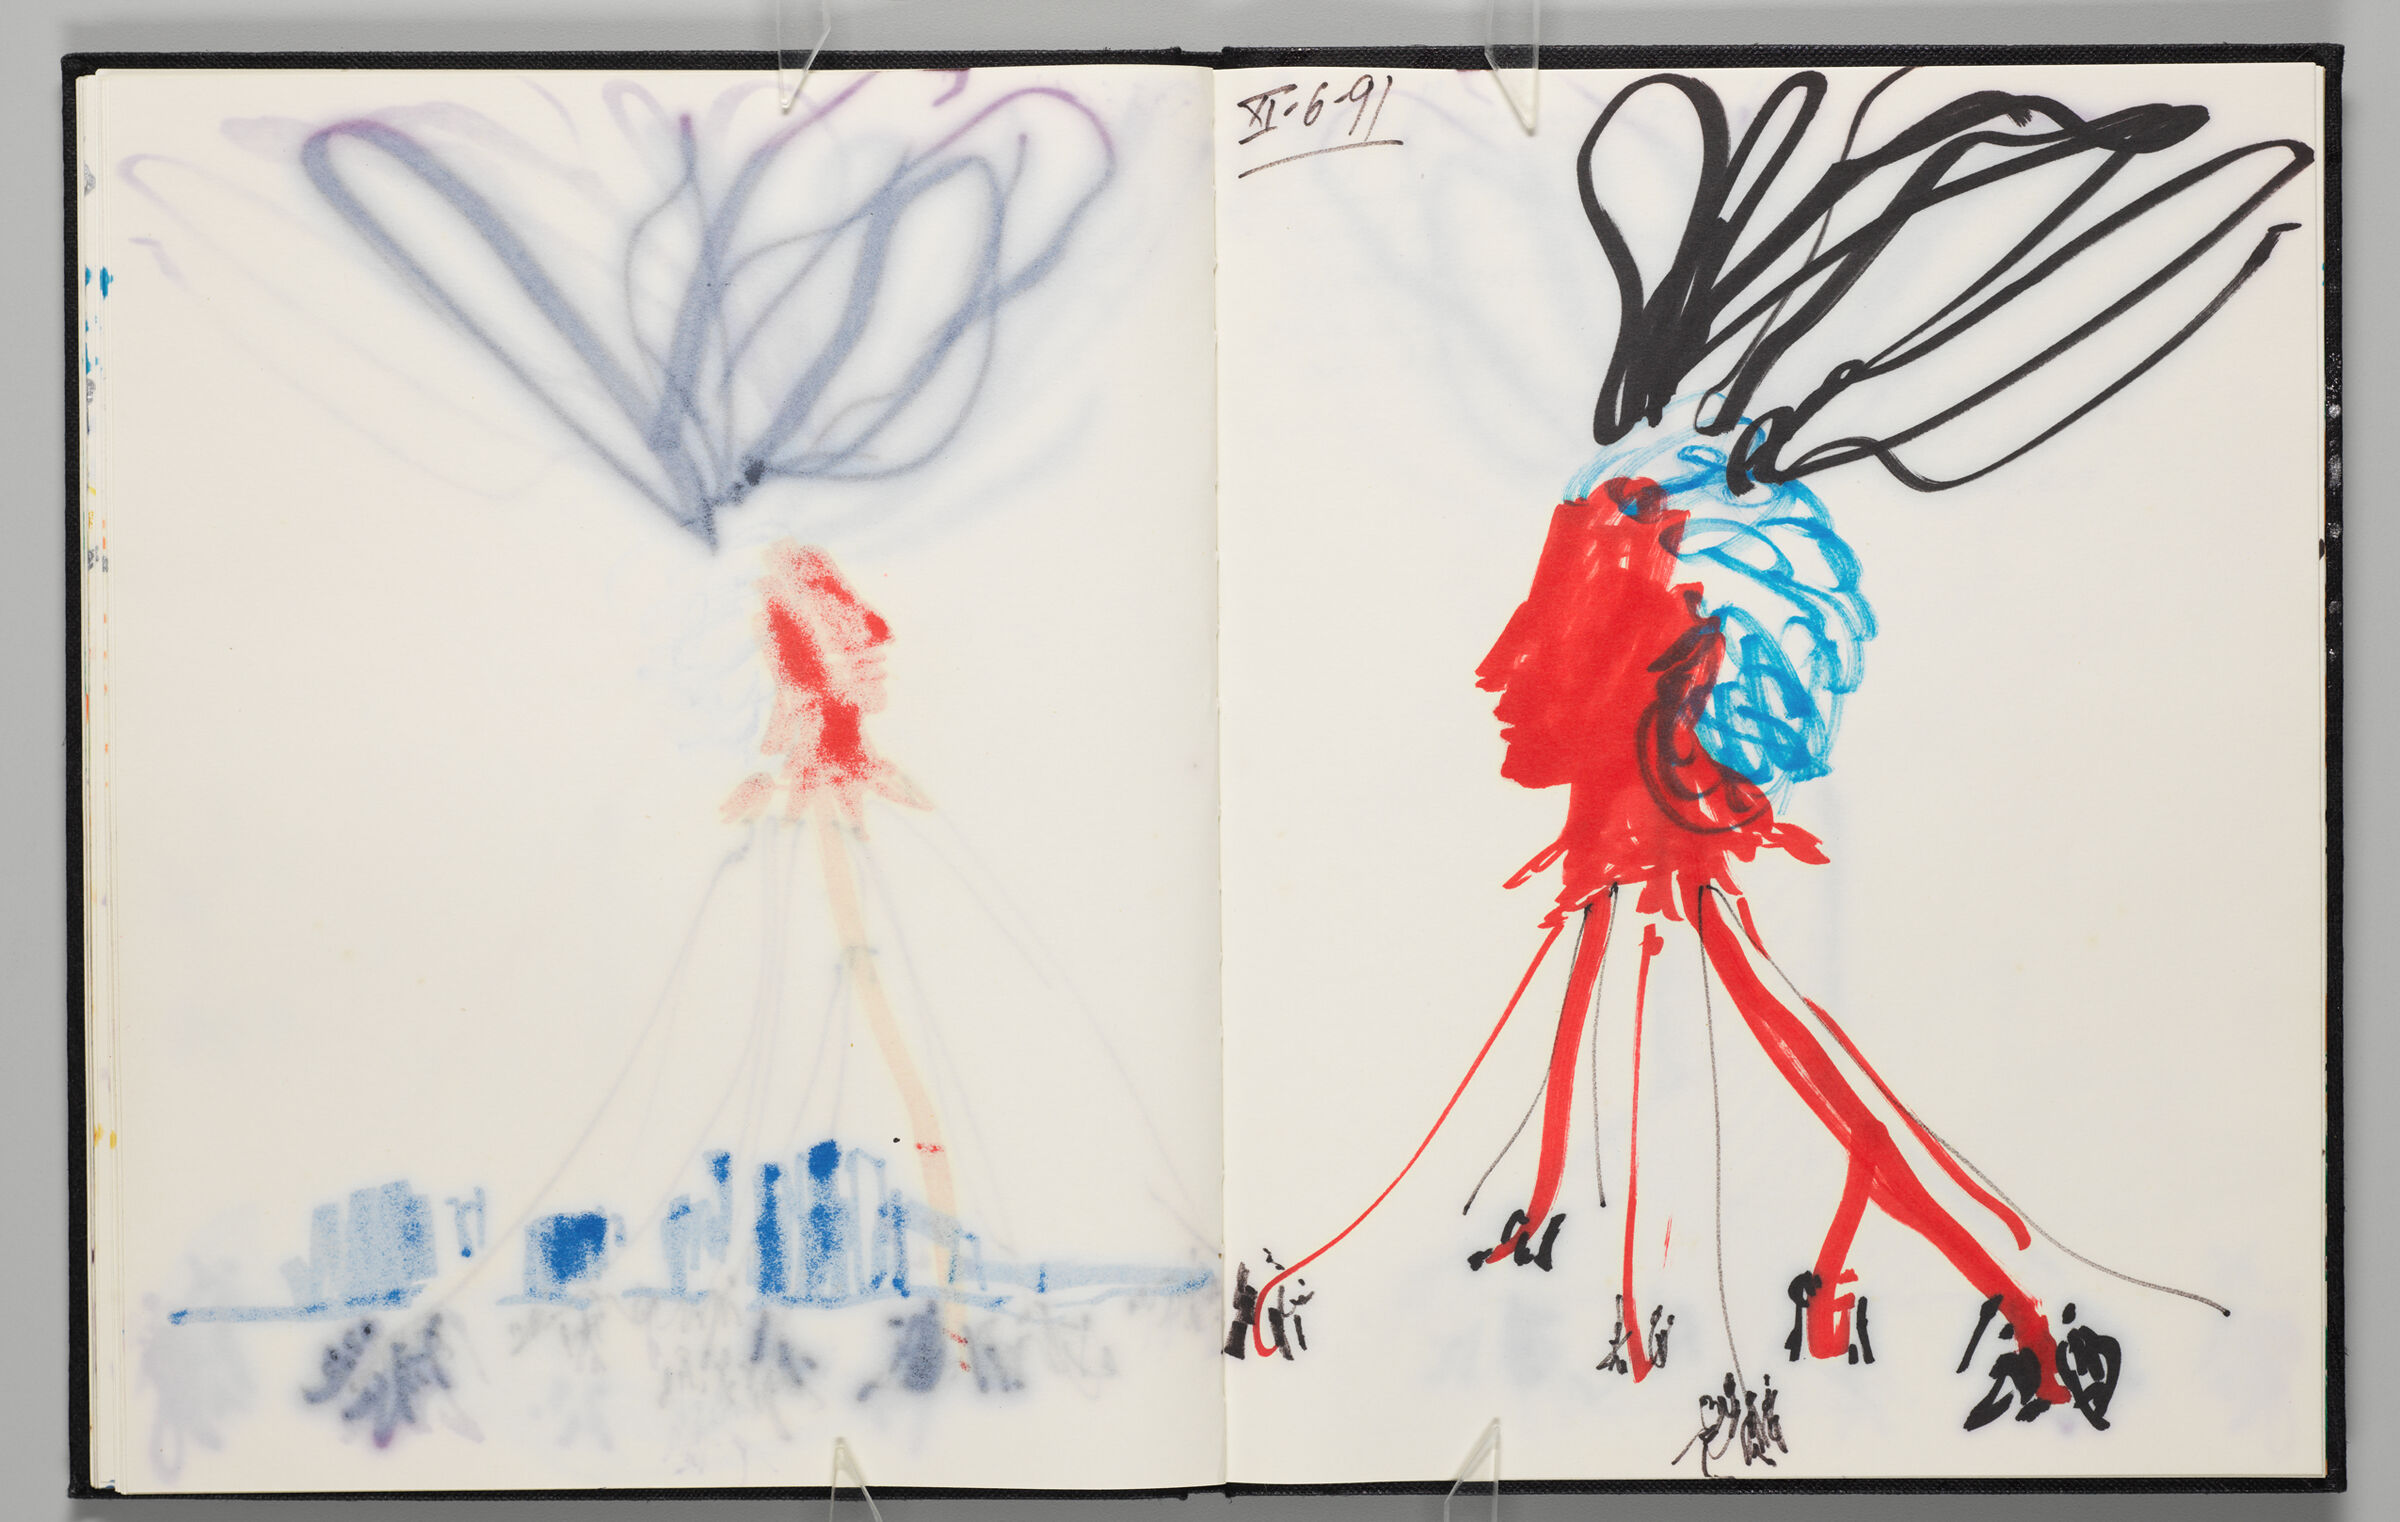 Untitled (Bleed-Through Of Previous Page And Color Transfer, Left Page); Untitled (